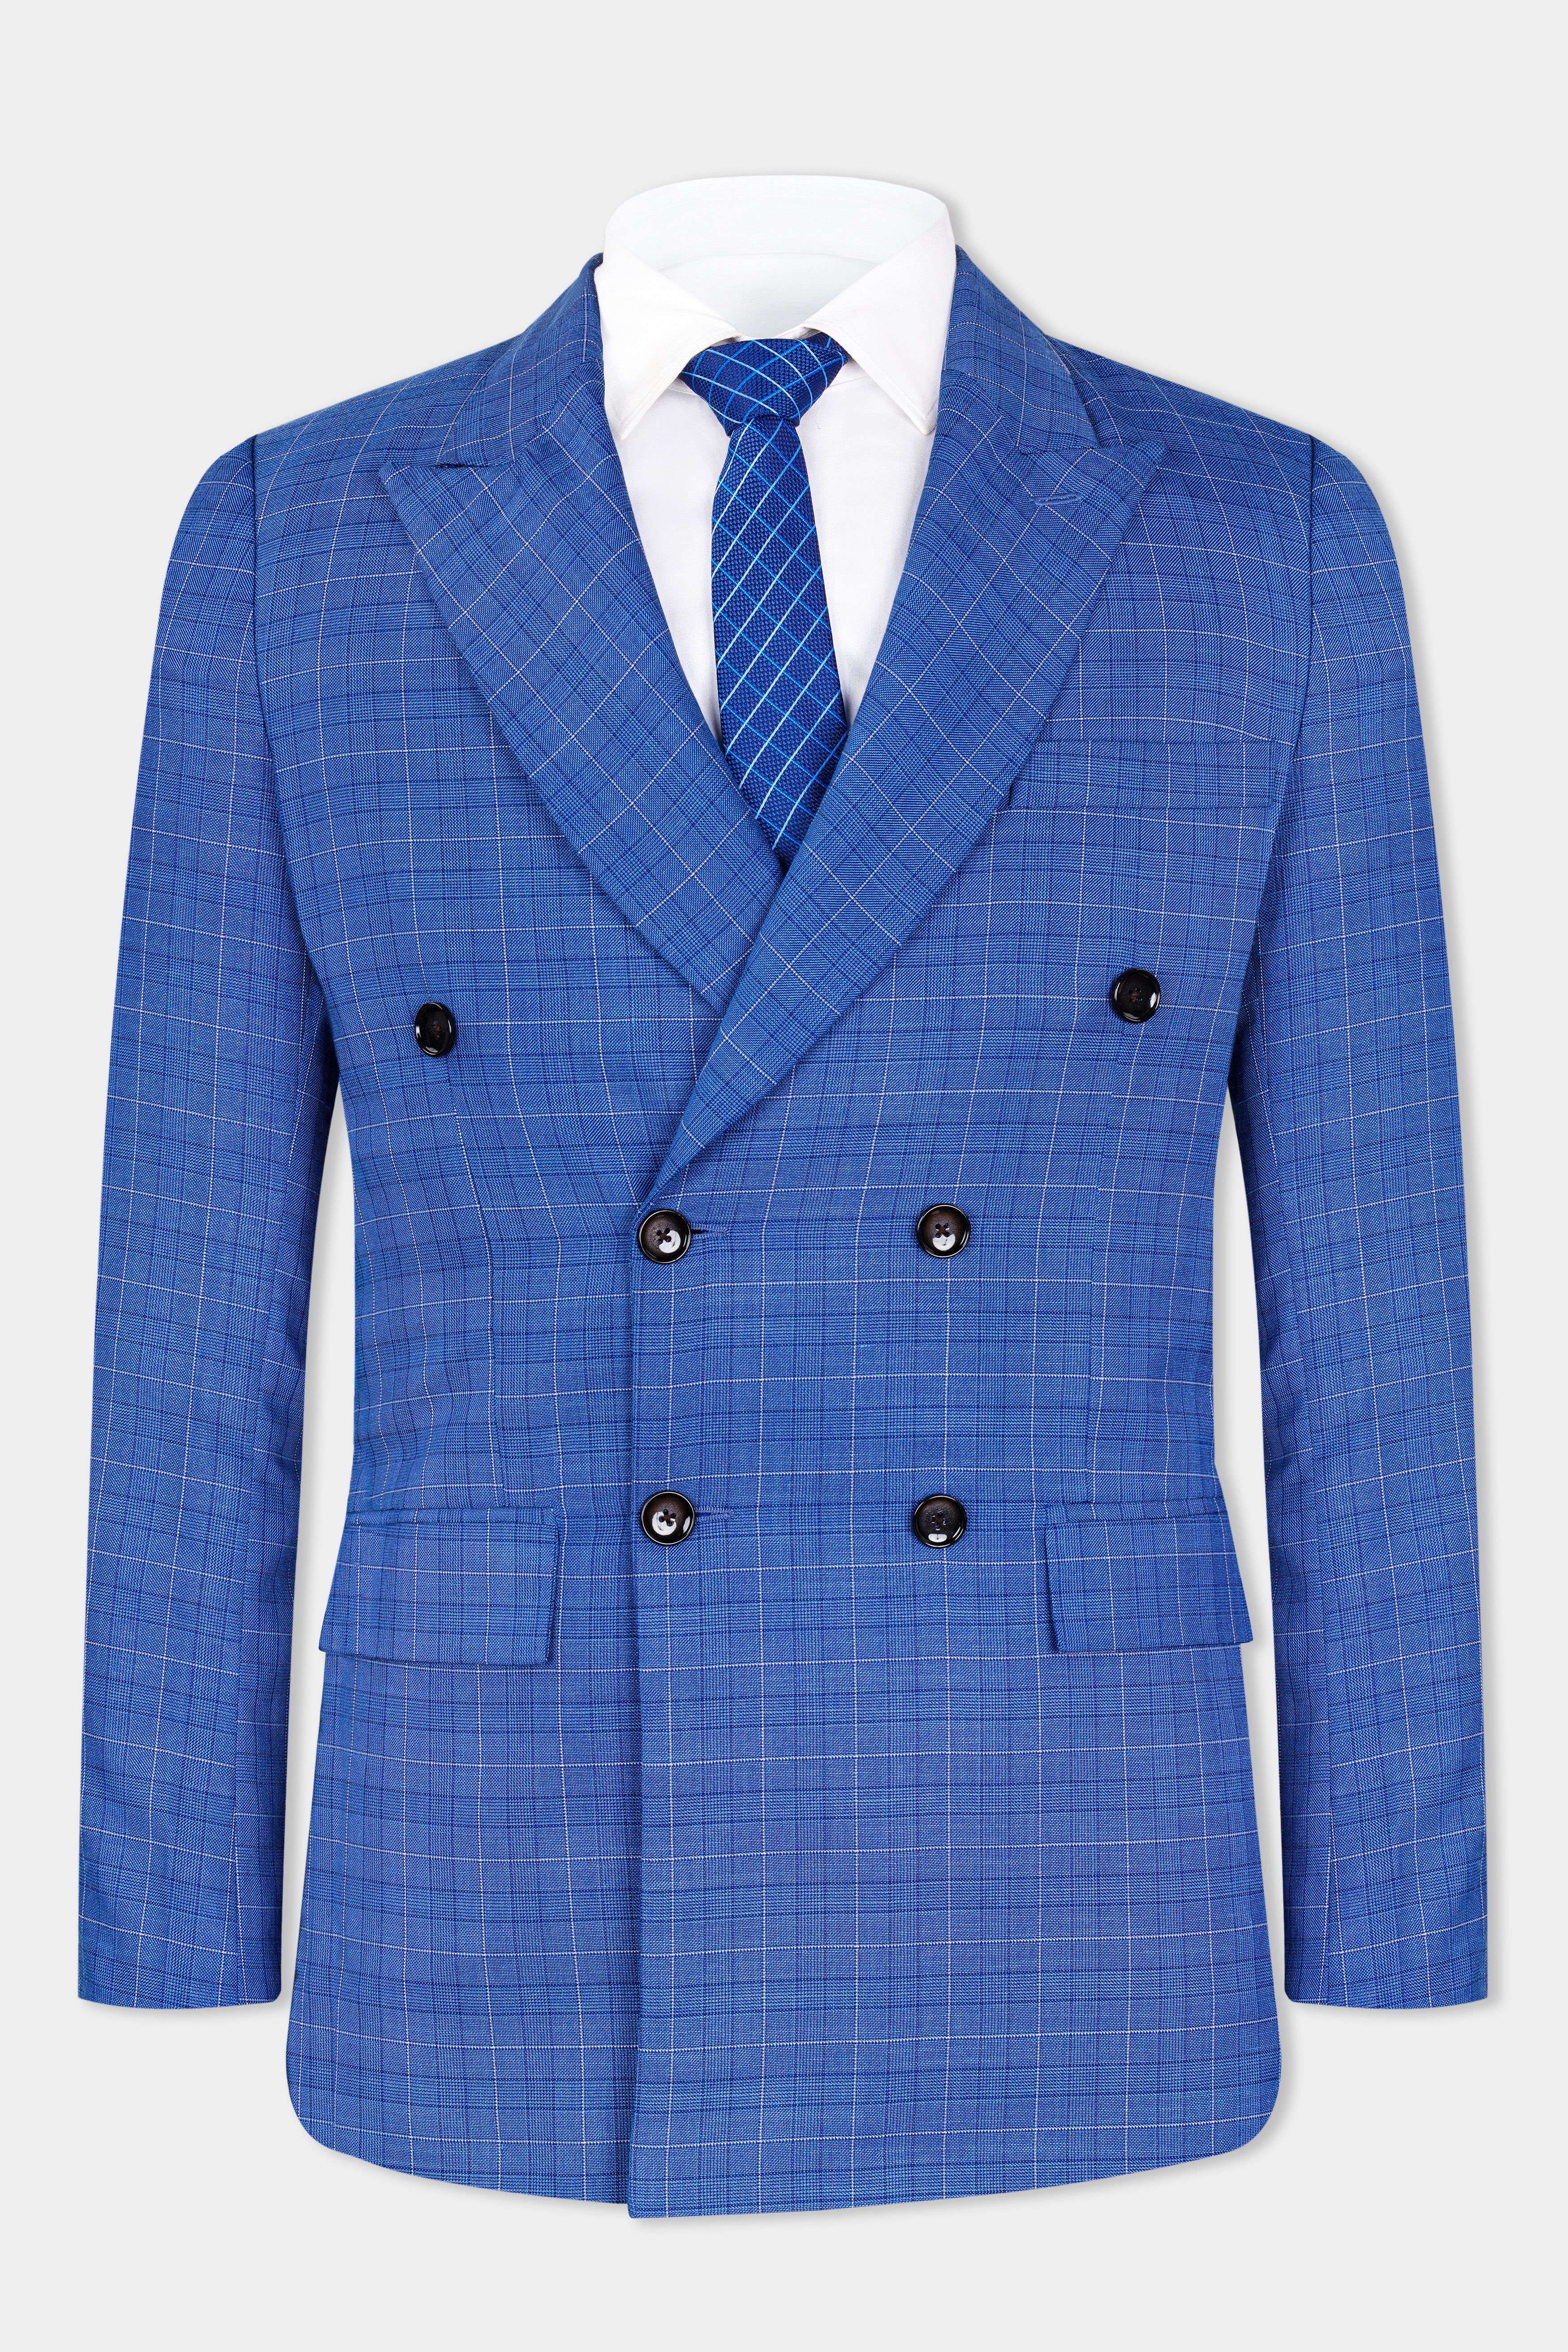 Brioni Fitted double-breasted Blazer - Farfetch